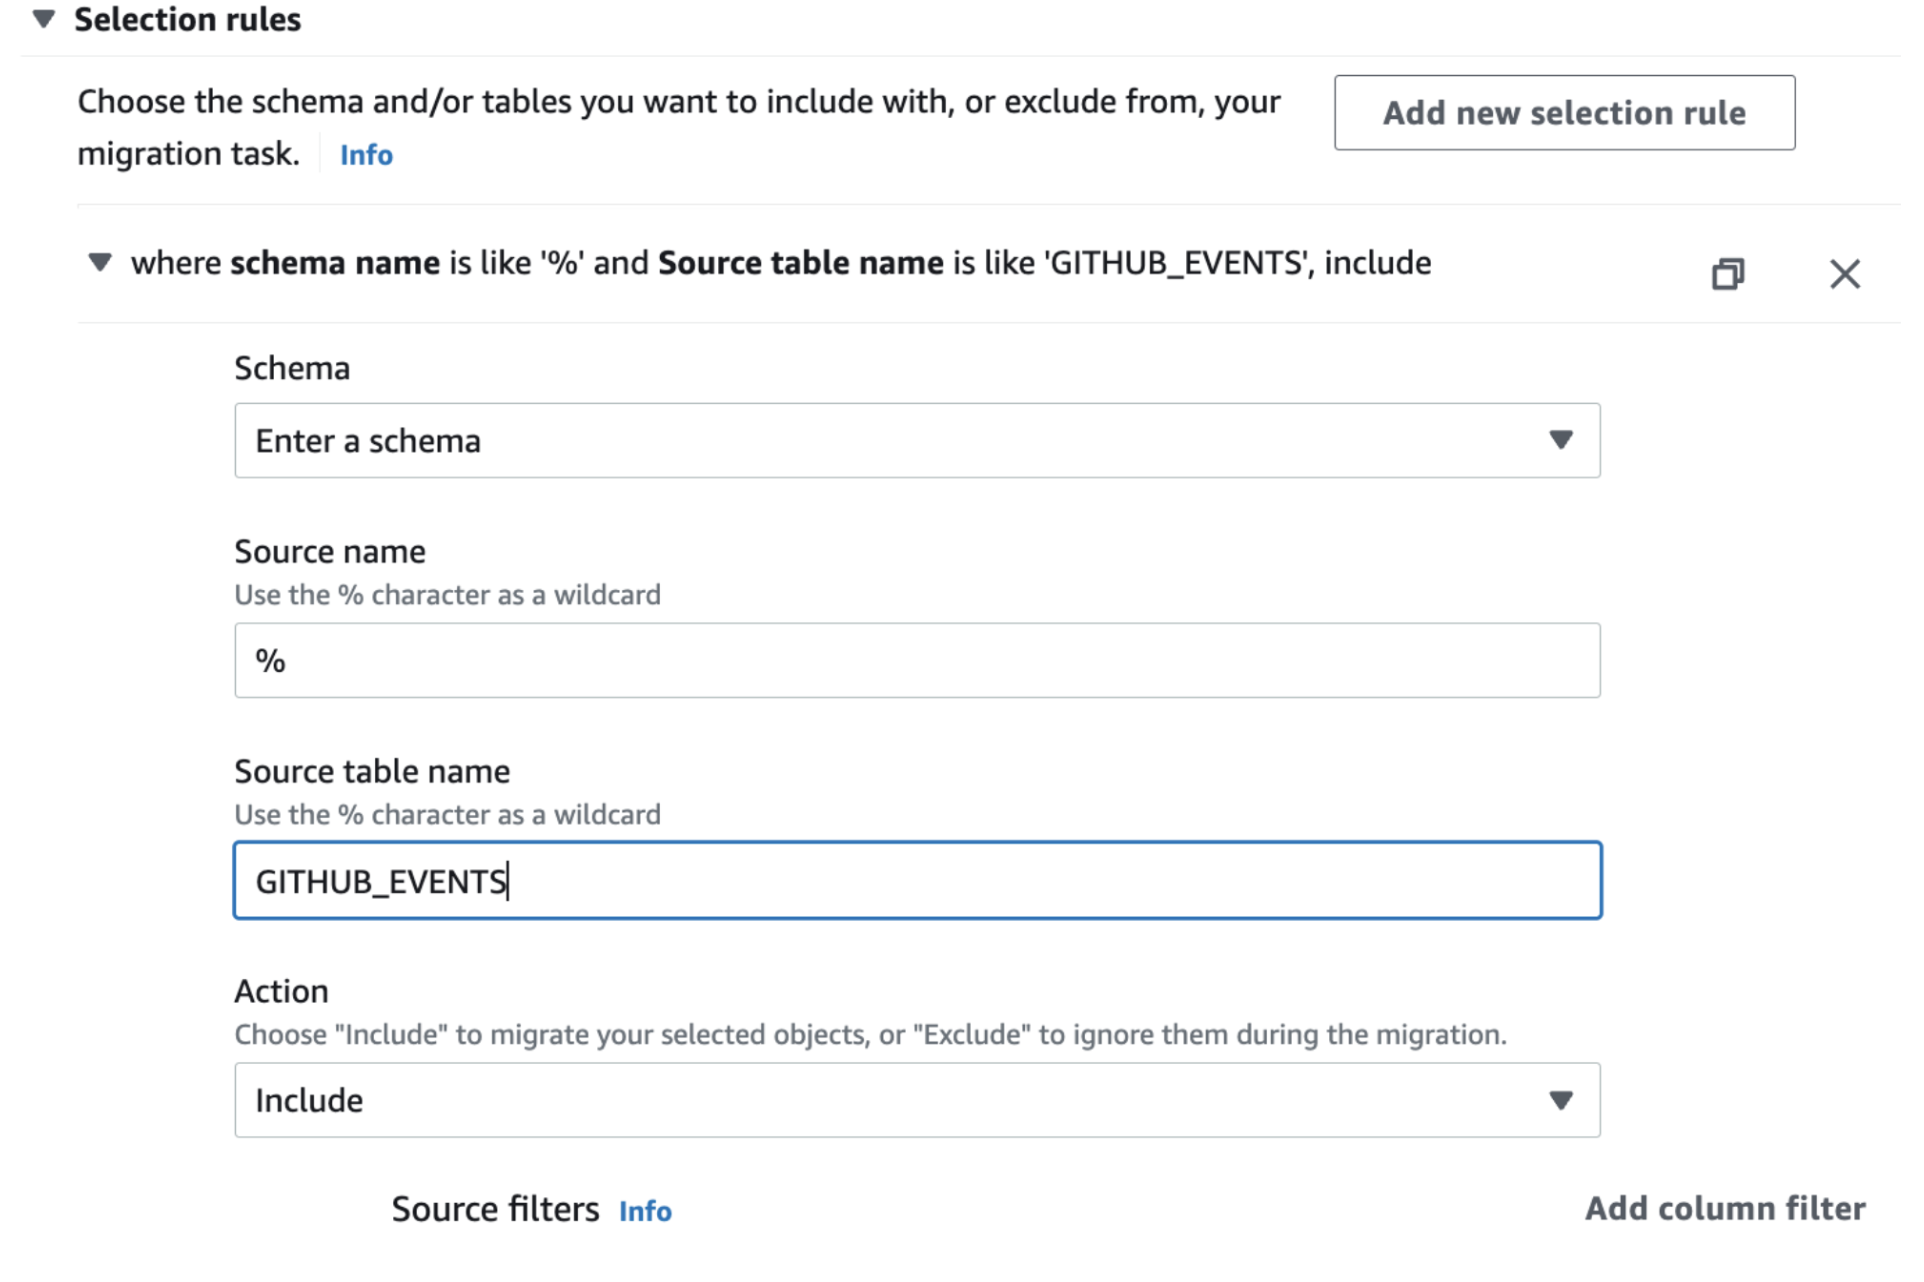 AWS DMS migration task selection rules